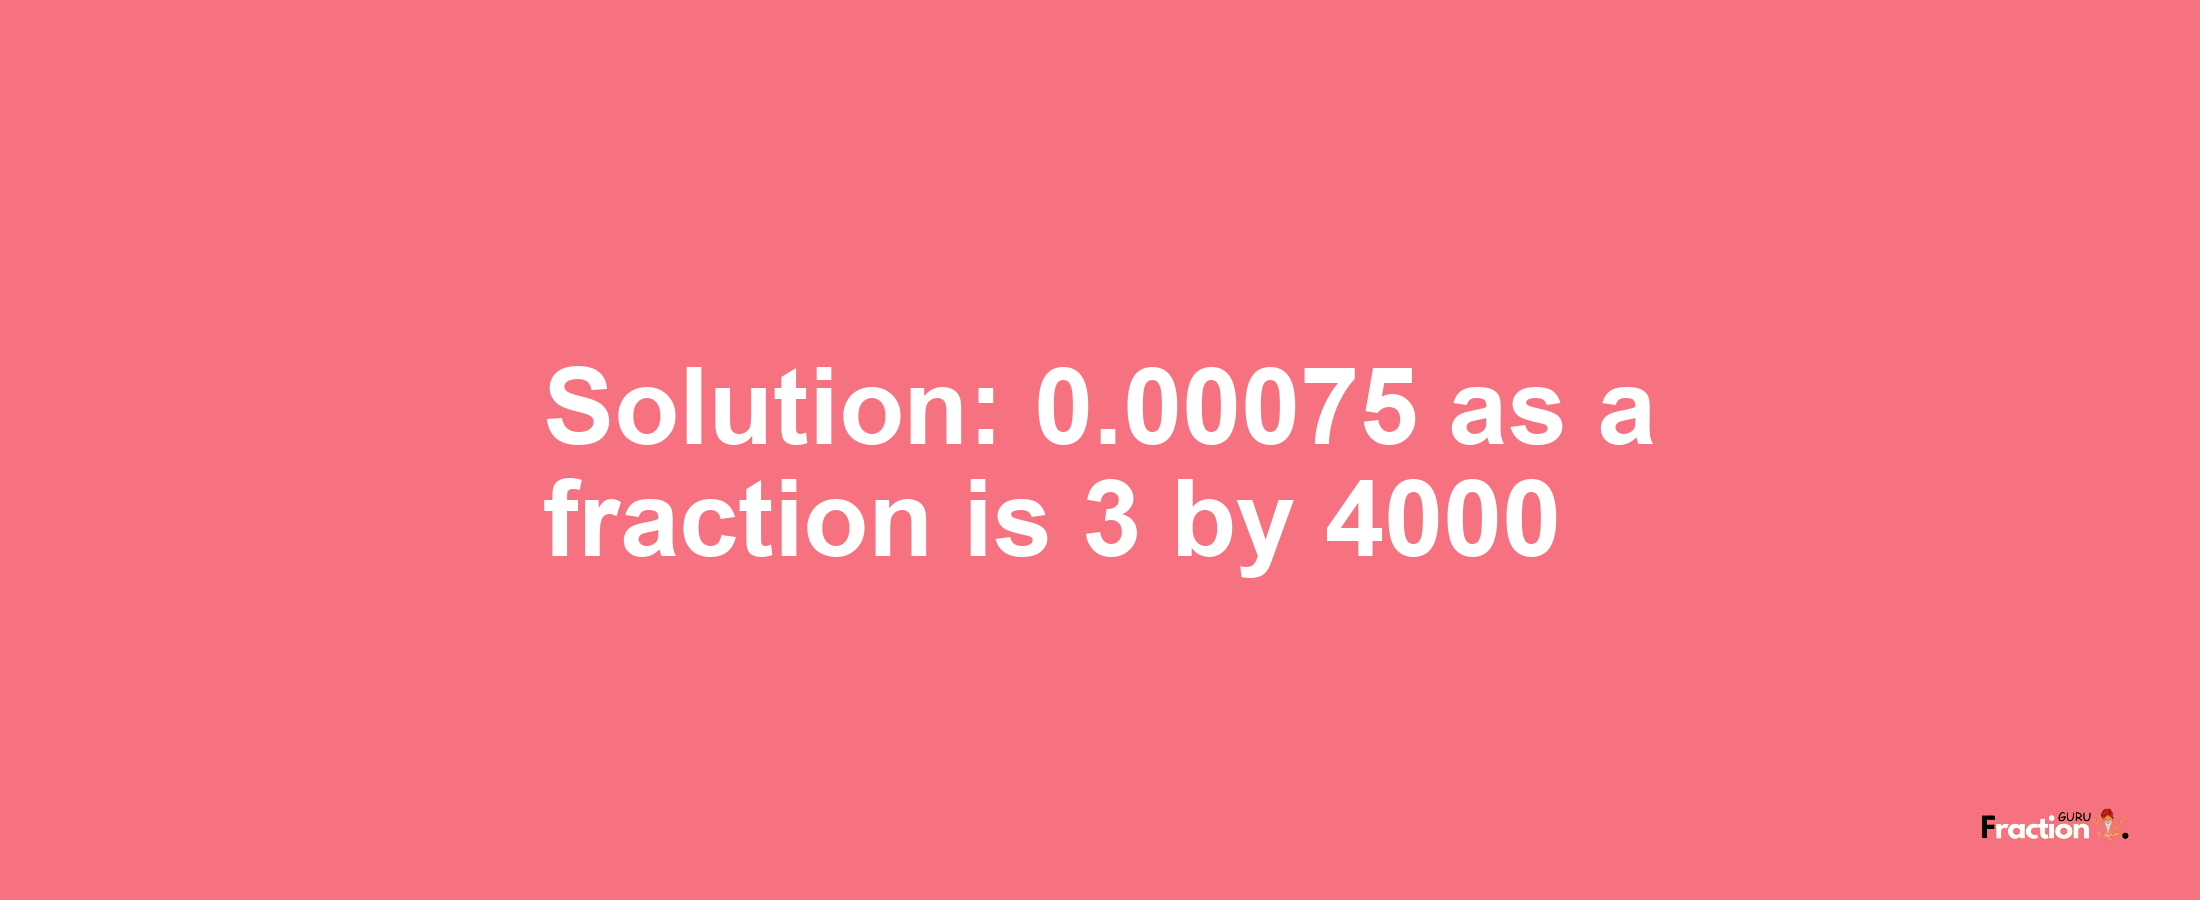 Solution:0.00075 as a fraction is 3/4000